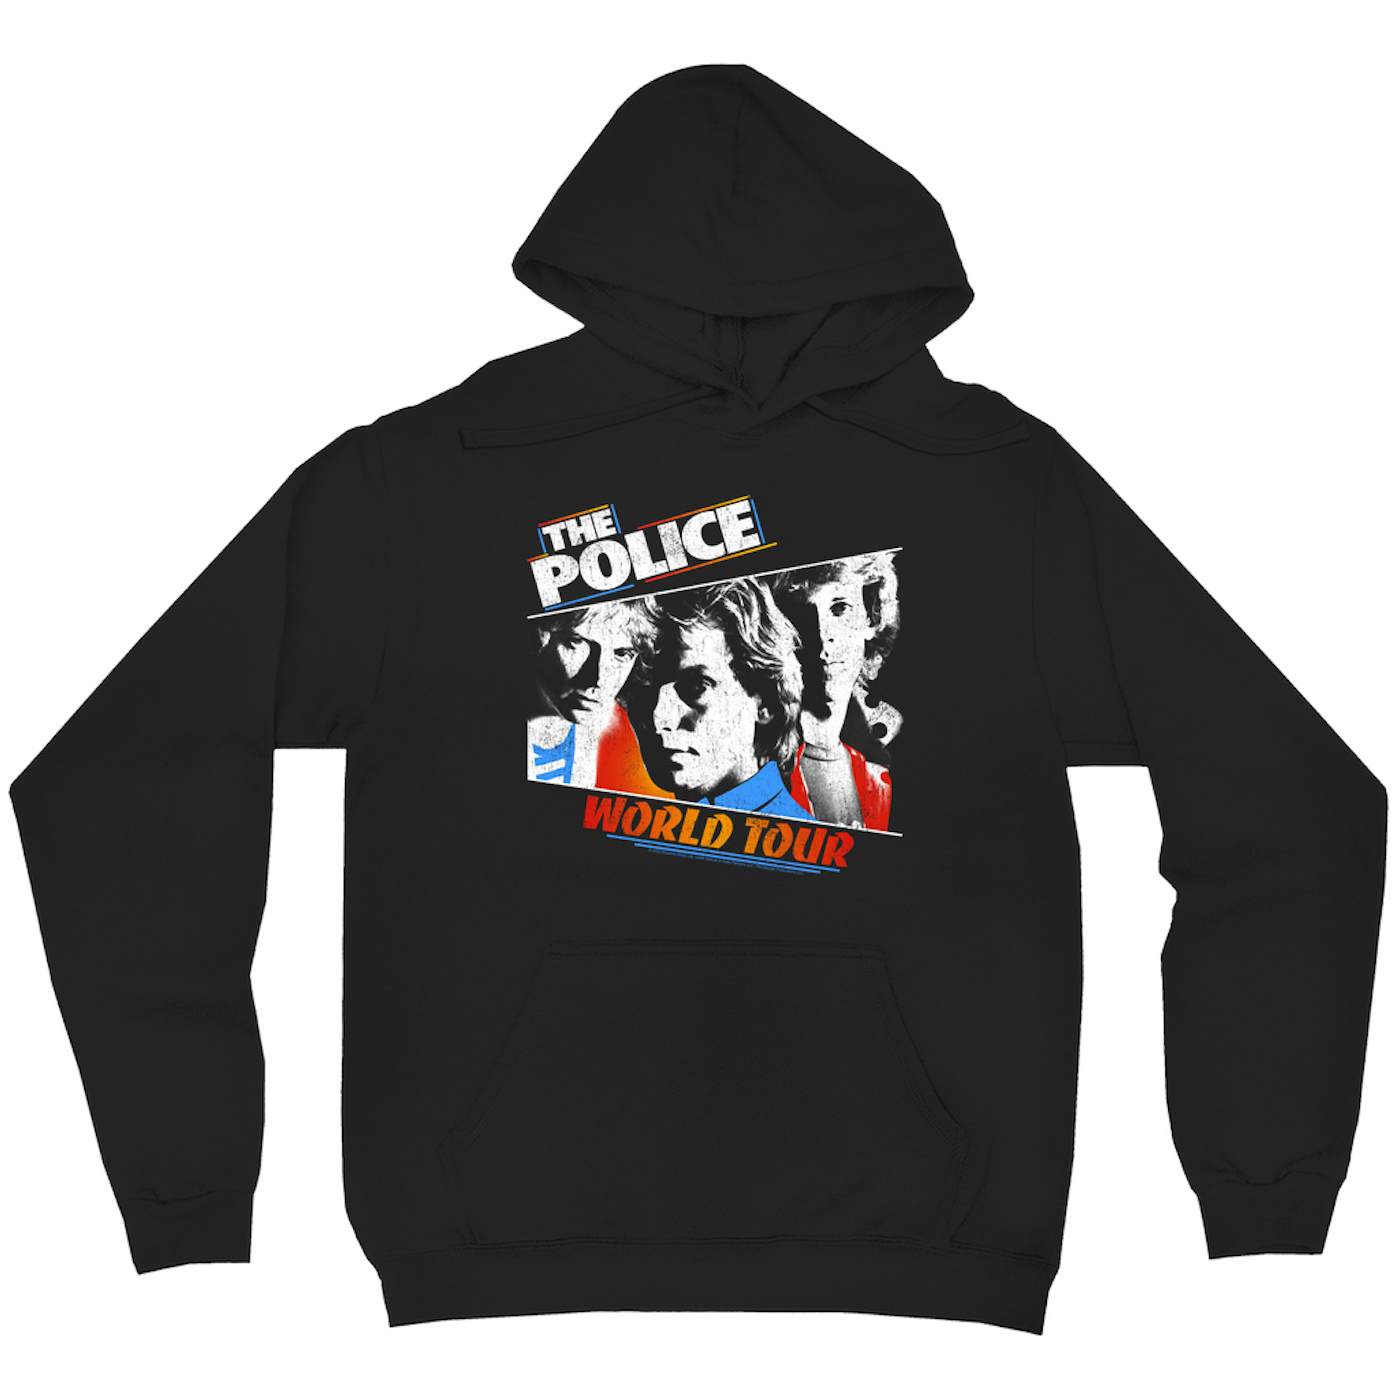 The Police Hoodie | Live In Concert World Tour (Merchbar Exclusive) The Police Hoodie